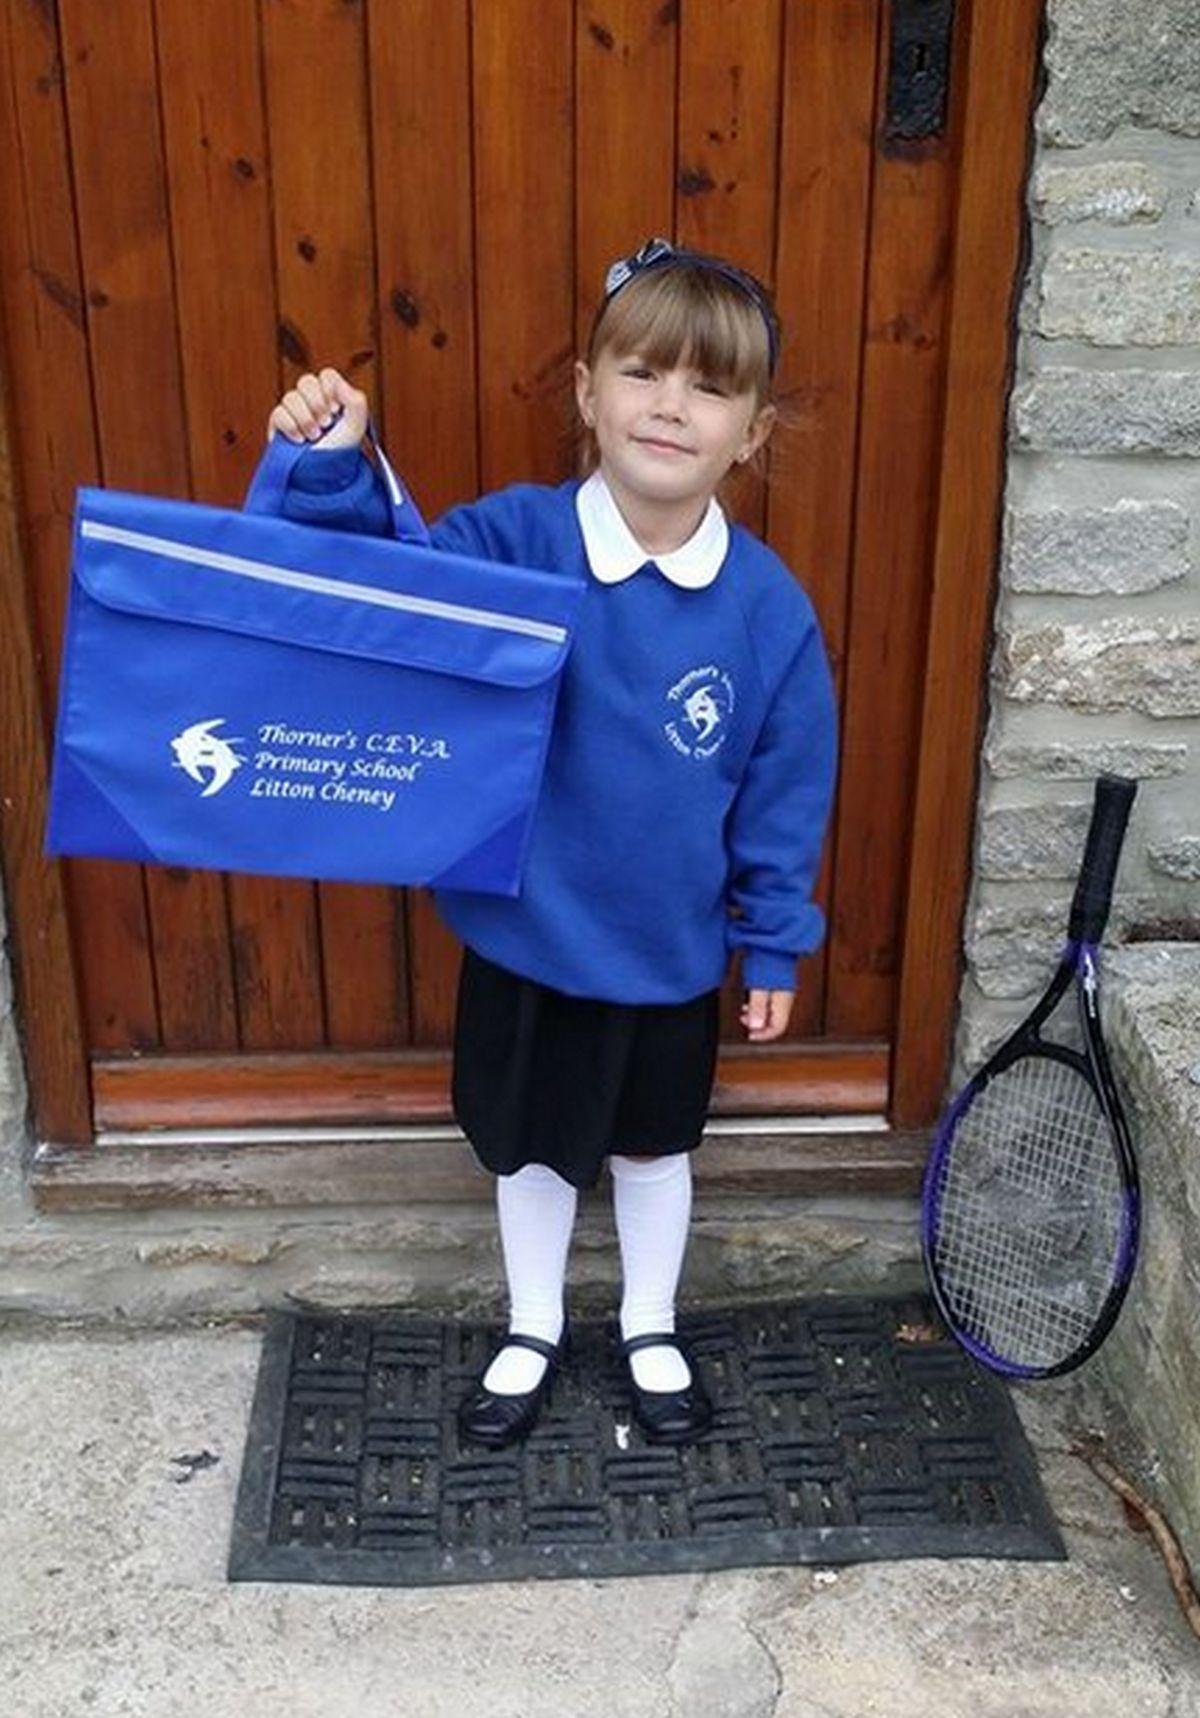 Back to School - Casey-May Strawbridge, started school at Thorners this term. - Picture by Kate Strawbridge